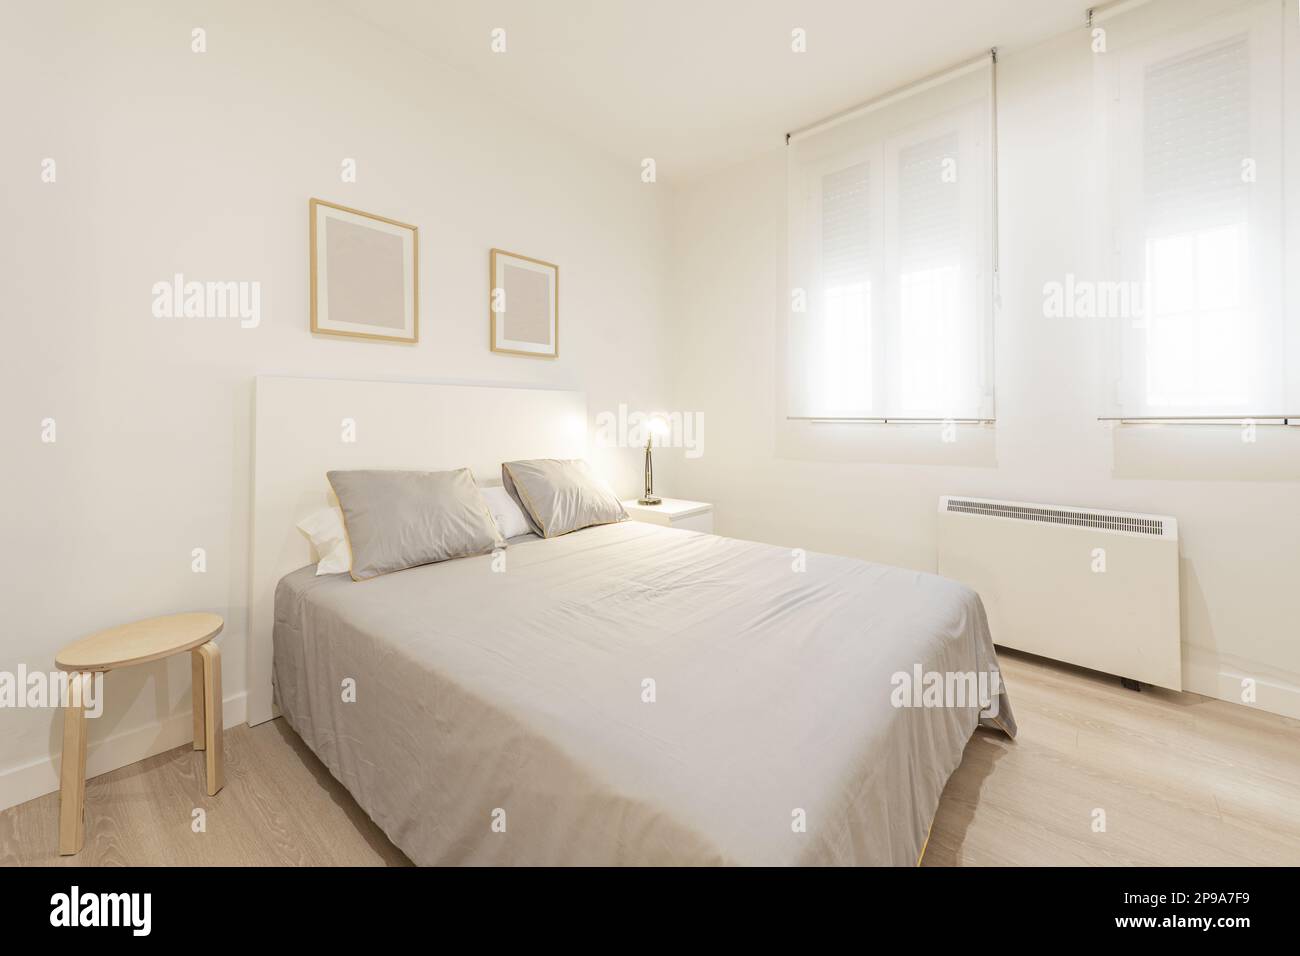 Bedroom with a double bed with wooden bedside tables, a gray bedspread with cushions, double windows with roller shutters and an electric heater Stock Photo